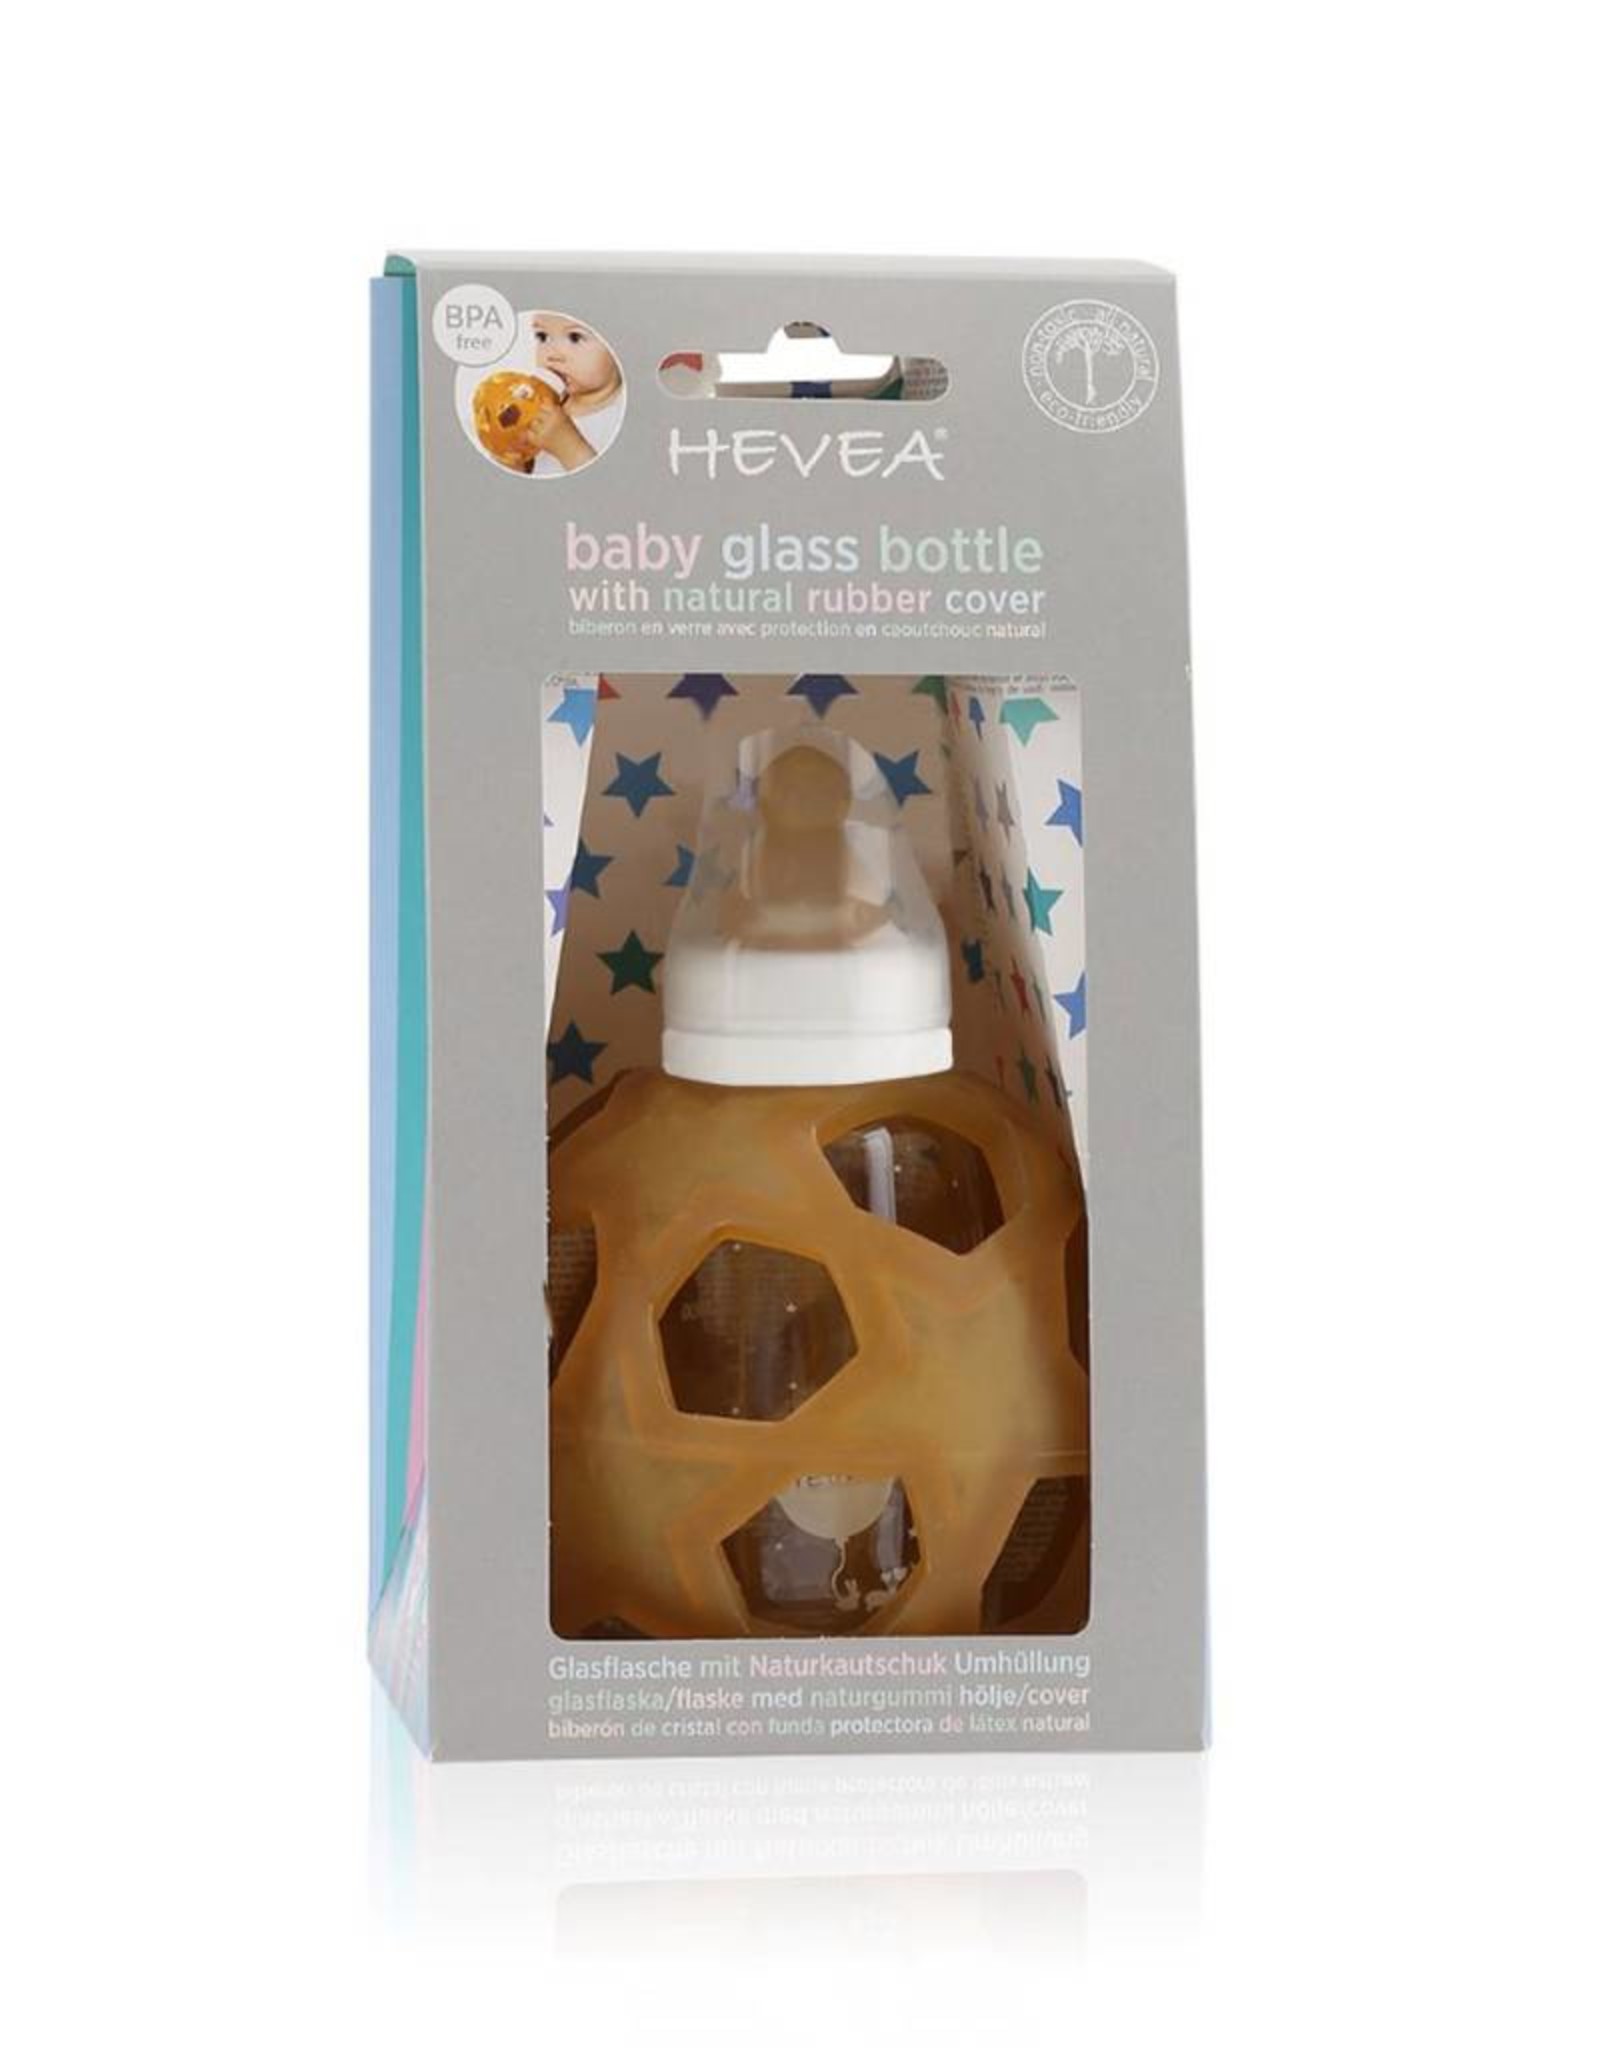 Hevea 2-in-1 Baby Glass Bottle with Star Ball